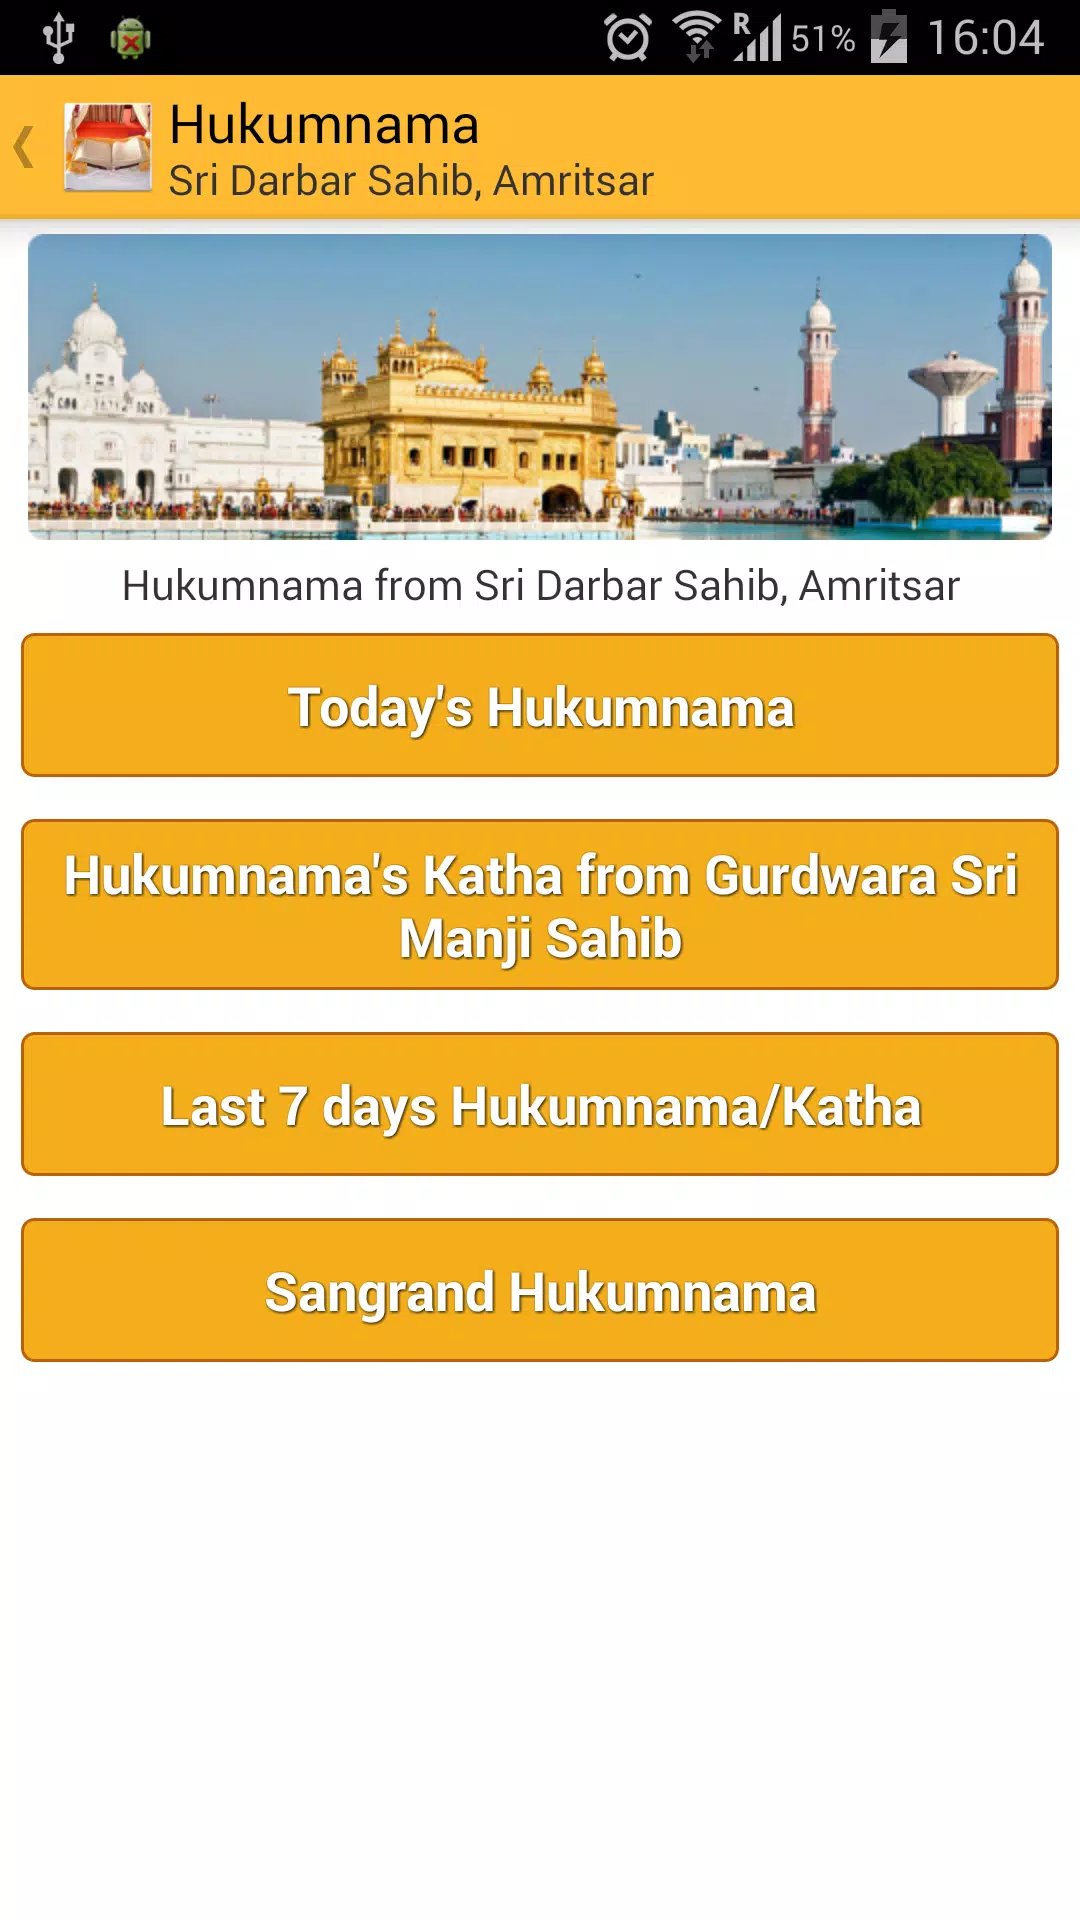 SIKHBOOK Connecting Spritually APK for Android Download